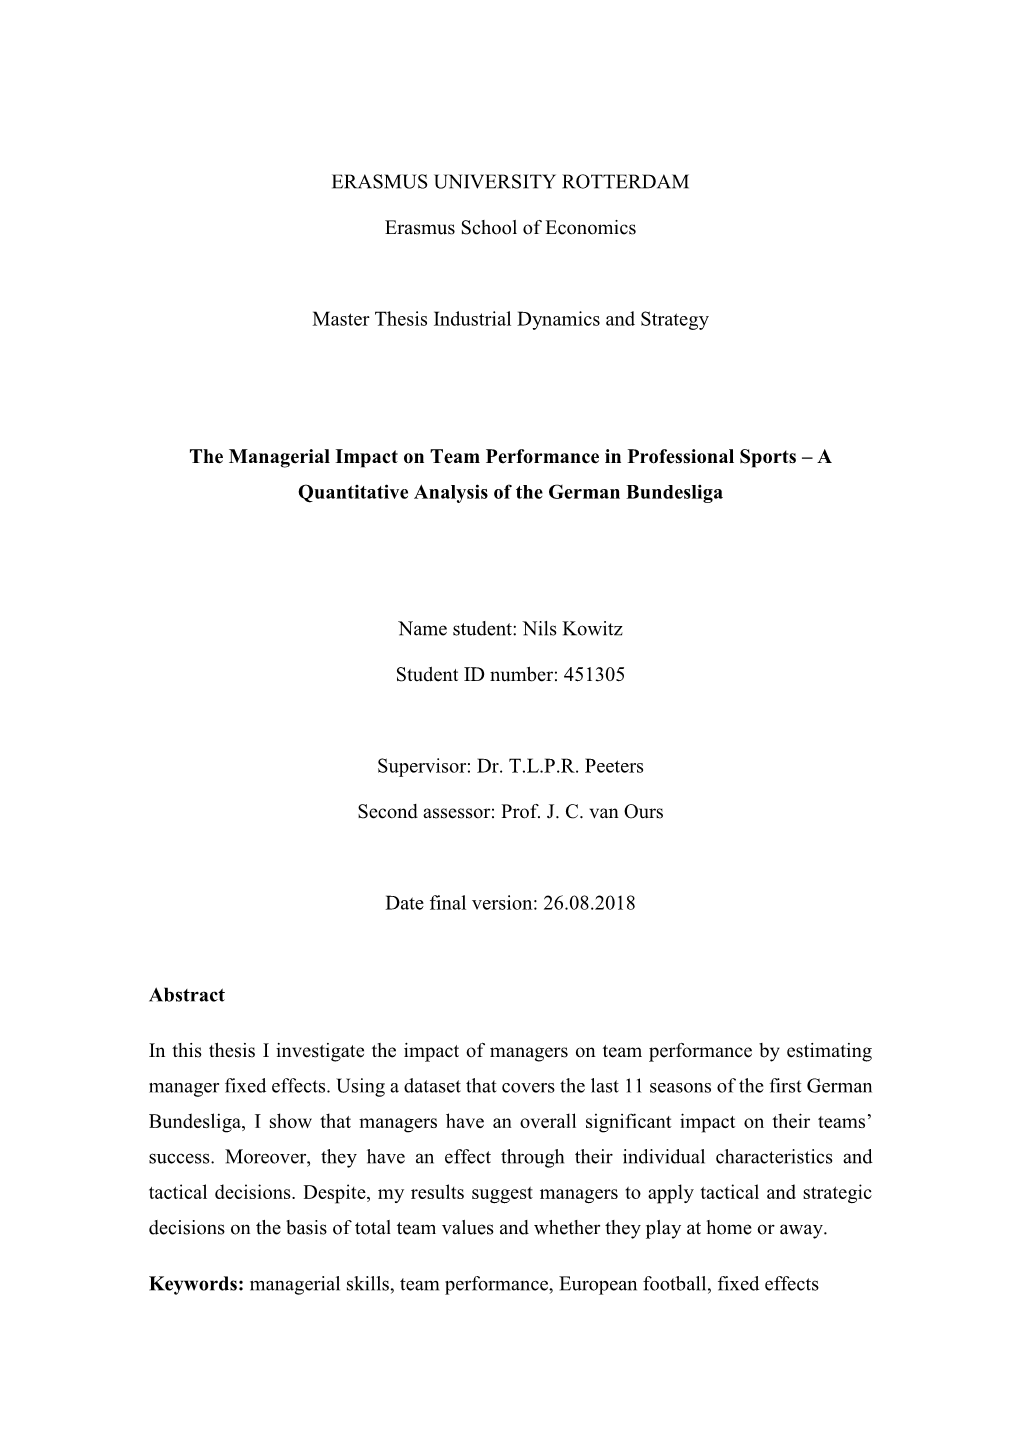 ERASMUS UNIVERSITY ROTTERDAM Erasmus School of Economics Master Thesis Industrial Dynamics and Strategy the Managerial Impact On